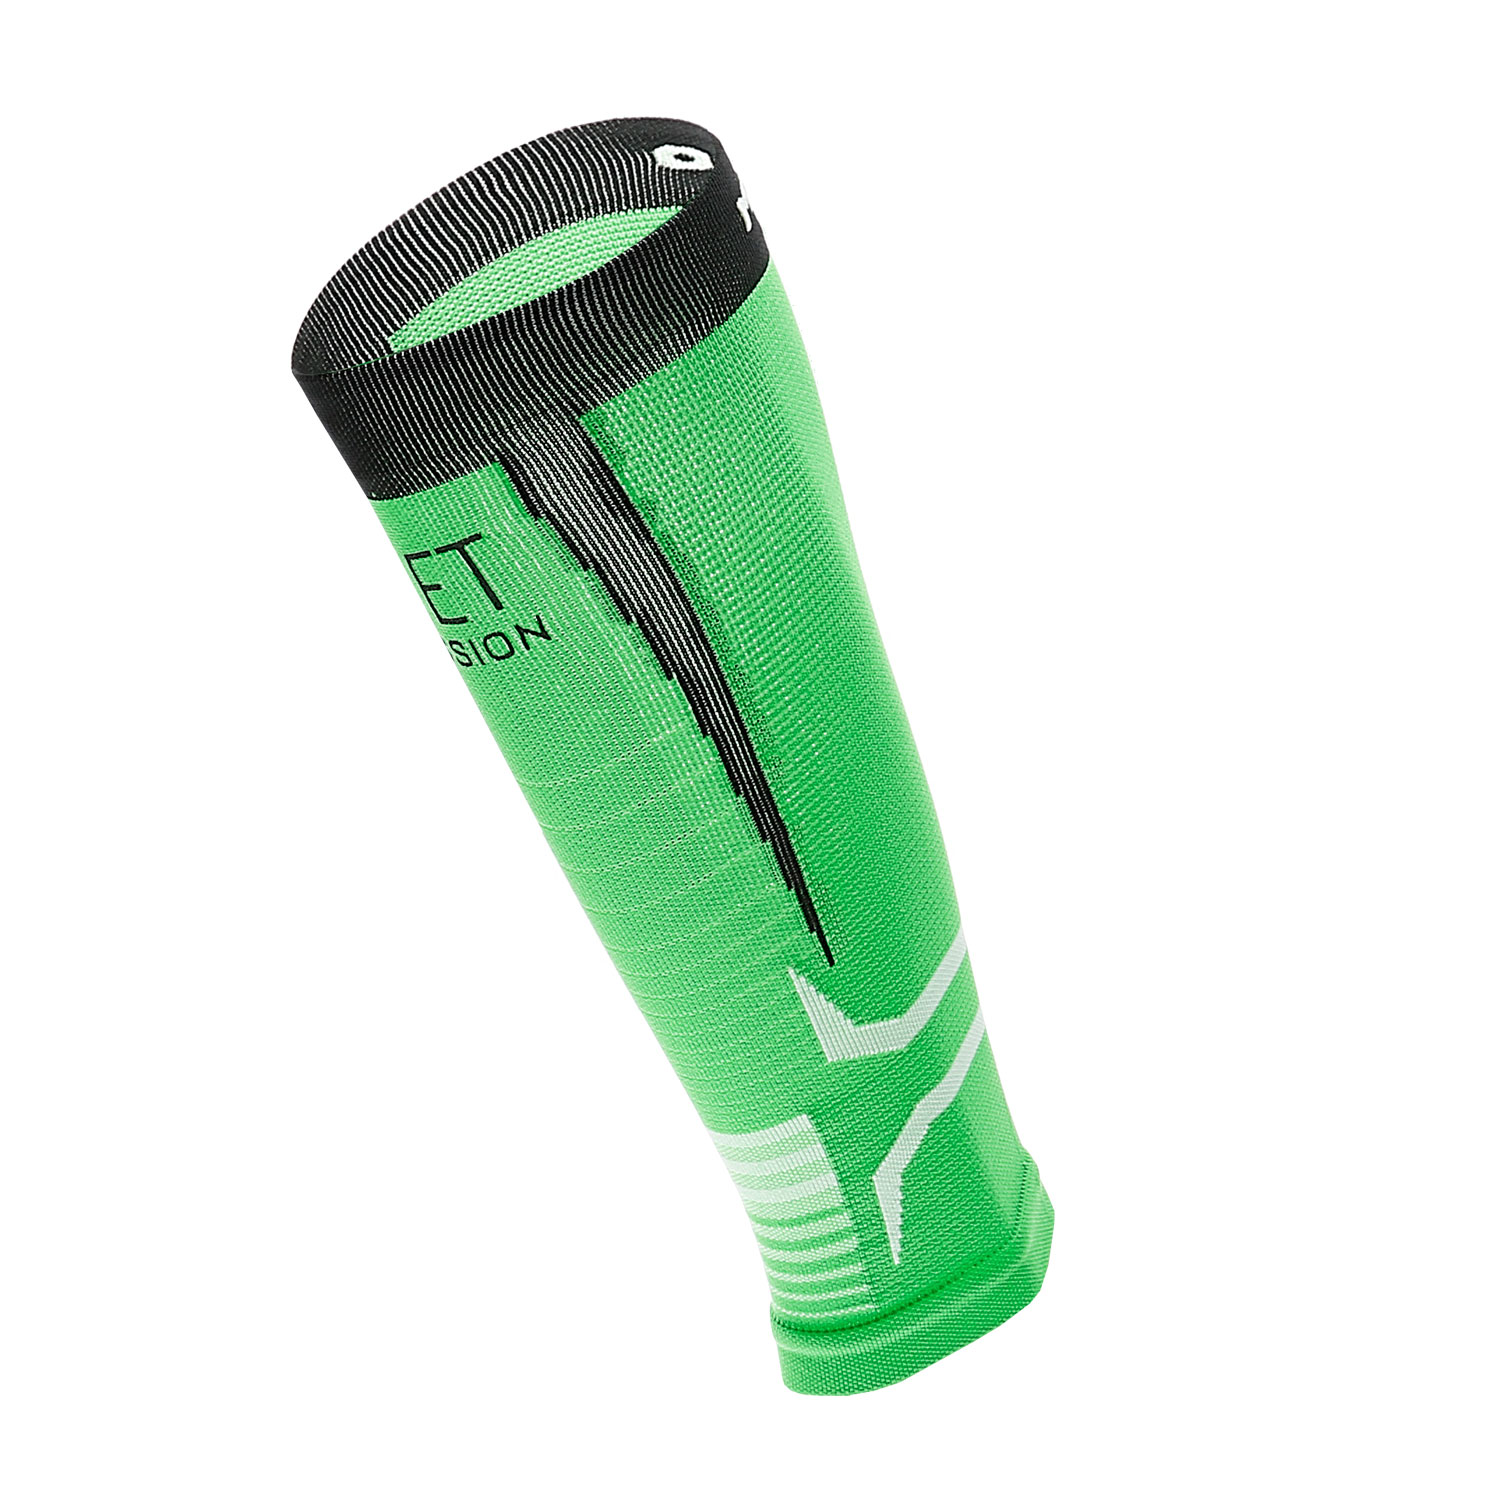 Mico Oxi-Jet Compression Calf Sleeves - Verde Fluo